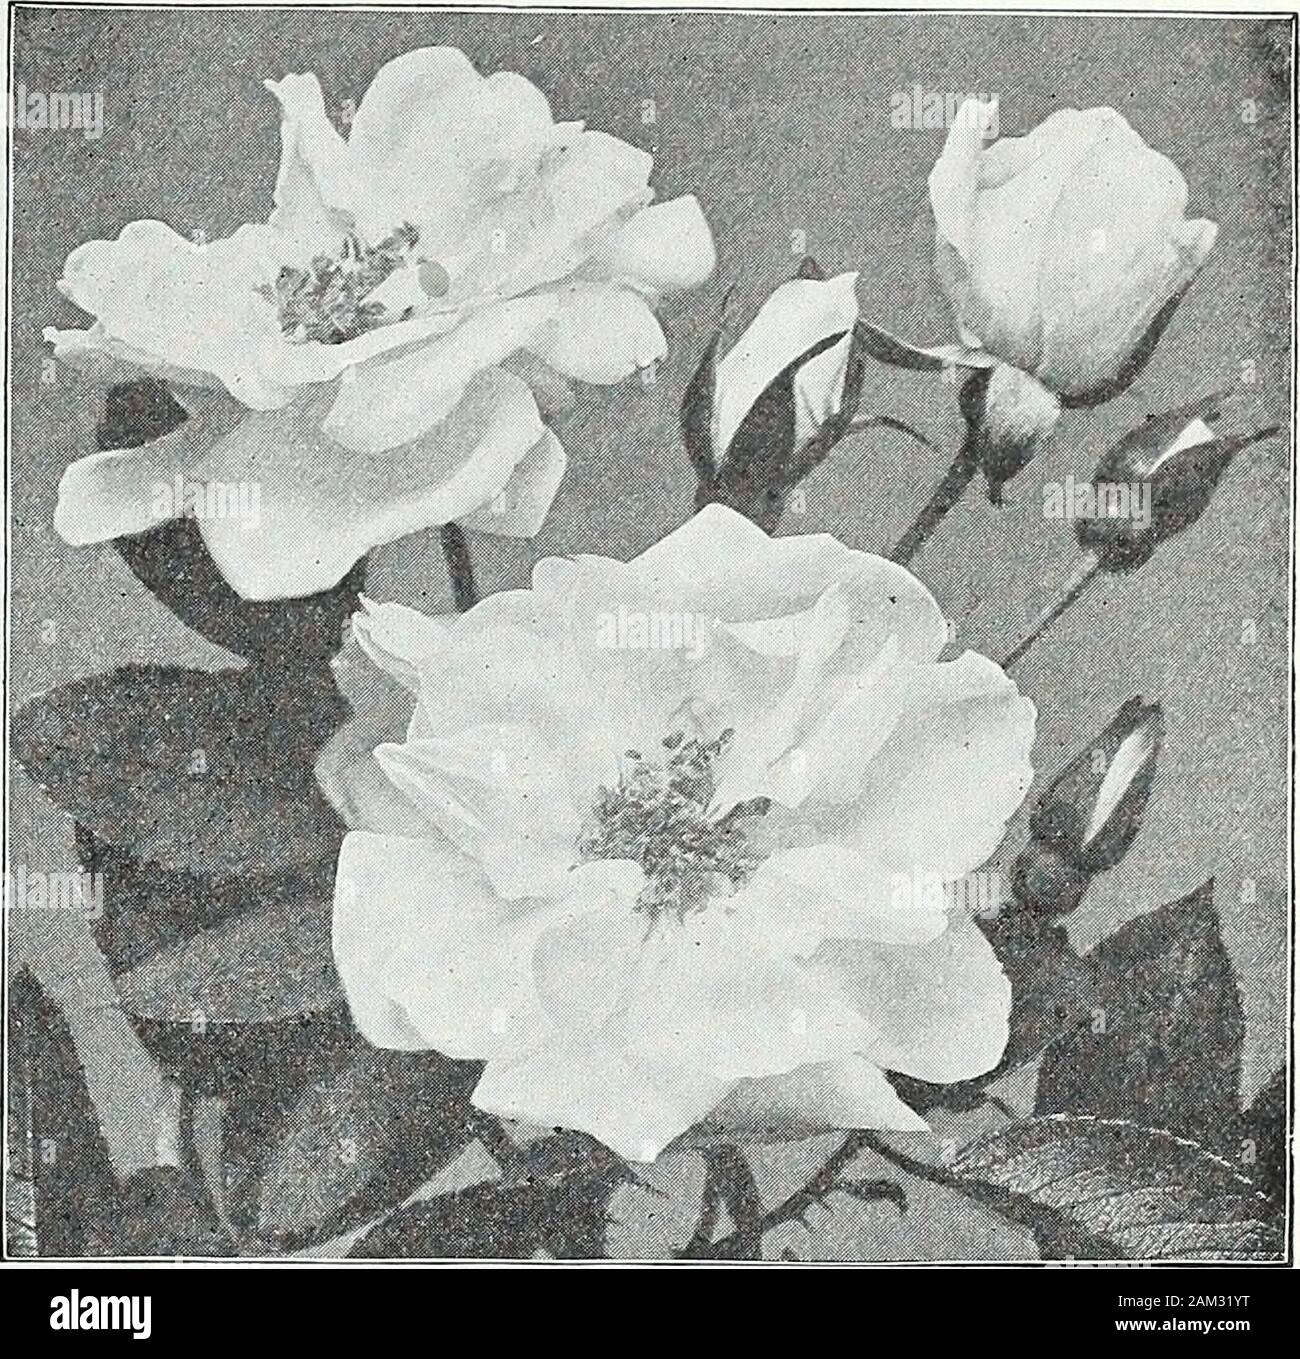 Farquhar's garden annual : 1922 . red flowers which do not fade. Yvonne Rabier. White flowers, borne in clusters. MEMORIAL OR EVERGREEN ROSES.75 cts. each; $7.50 per doz.; $60.00 per 100. Gardenia. Bright yellow; fragrant and free.Wichuraiana. Single white; blooms in clusters. BOURBON OR HYBRID CHINA ROSE.75 cts. each; $7.50 pei doz. Most valuable Summer and Autumn flowering variety, requiringonly moderate pruning.Madame Plantier. Pure White; very free bloomer. ROSA RUGOSA (Ramanas or Japanese Roses)$1.00 each; $10.00 per doz. {Except where otherwise priced)These are excellent for planting in Stock Photo